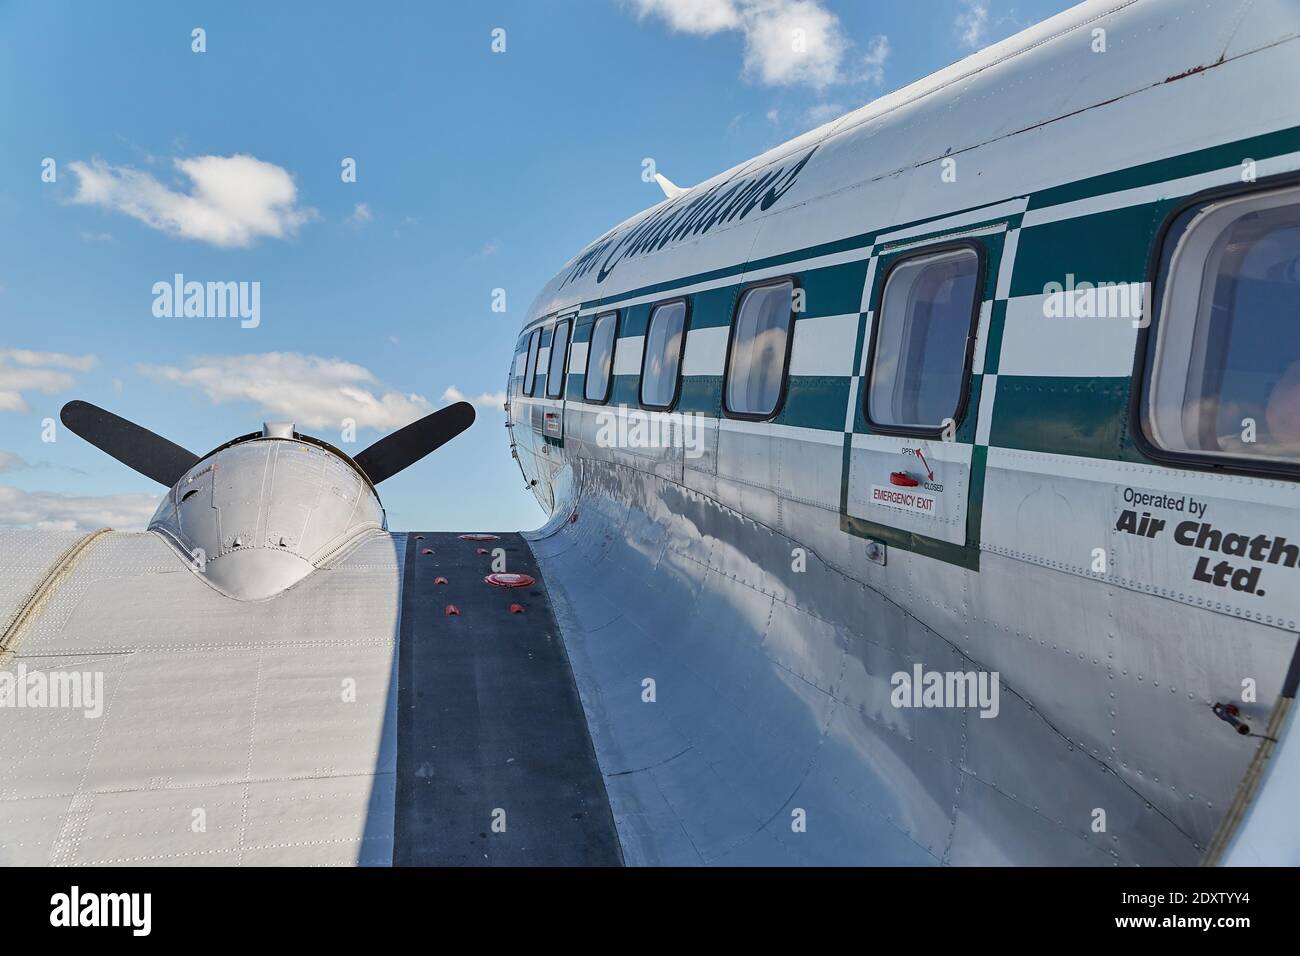 DC-3 aircraft wing and fuselage detail Stock Photo